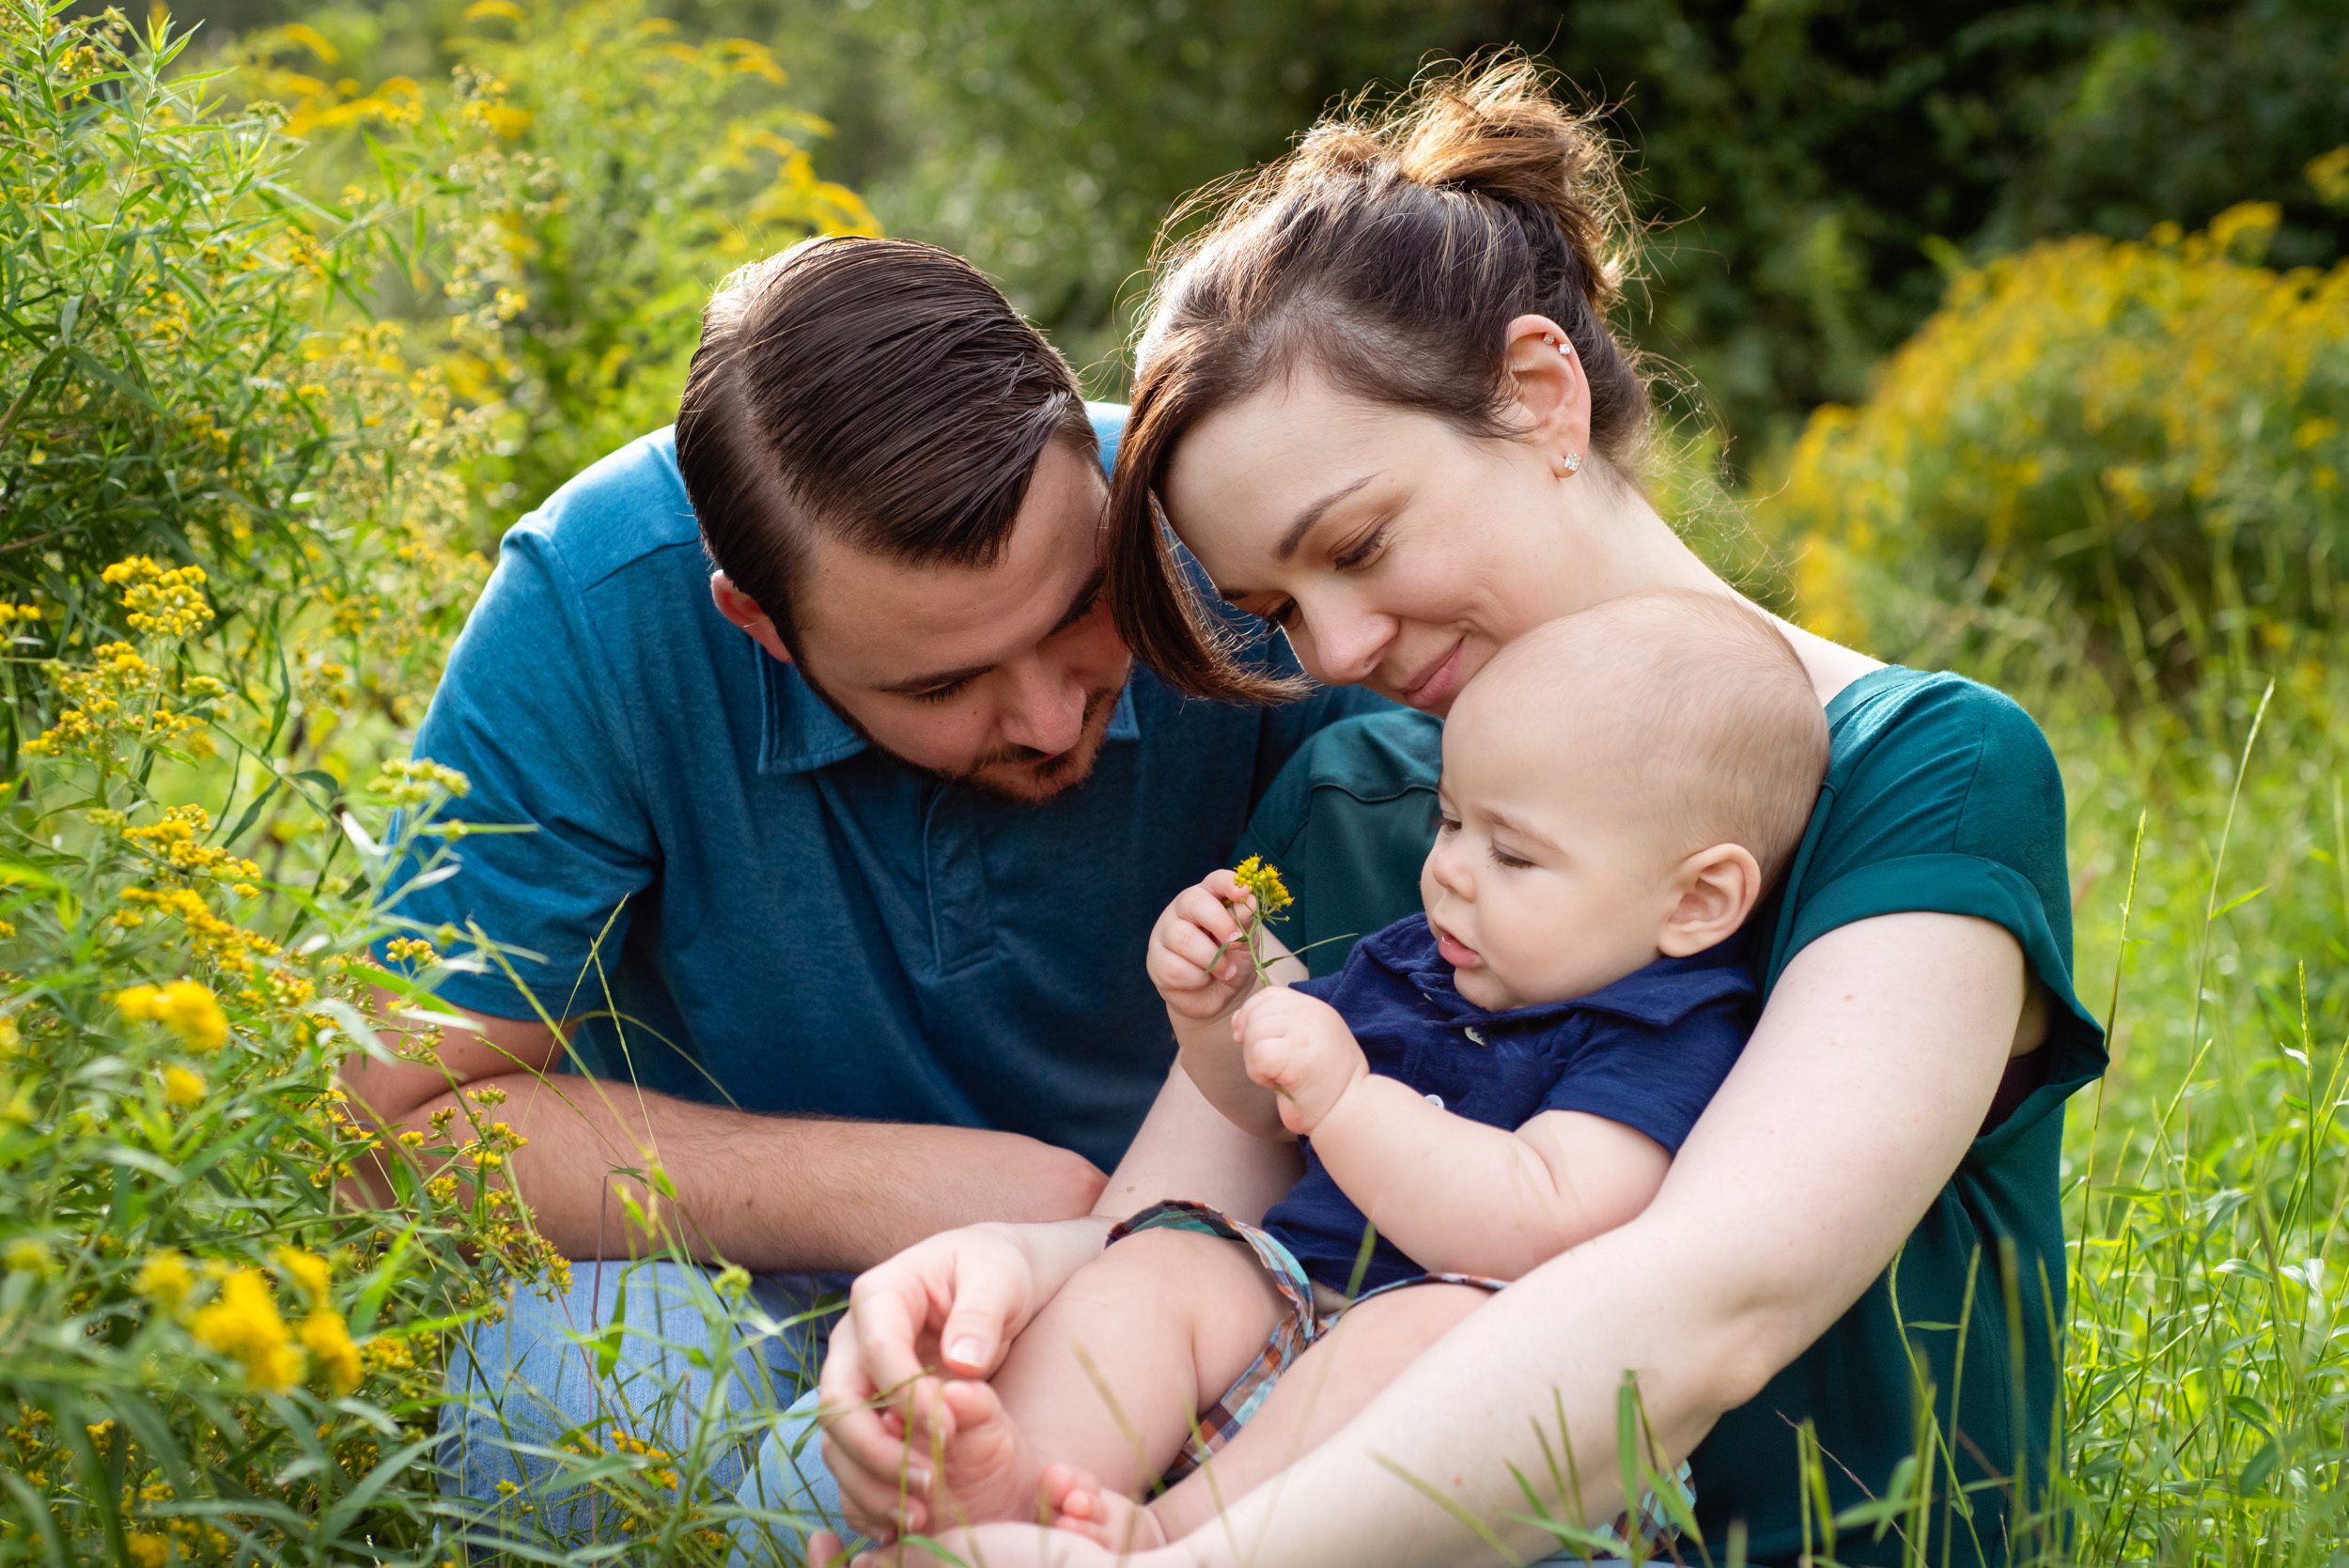 A young boy sitting in his parents' lap and examining a flower in a field of yellow wildflowers during a family photoshoot